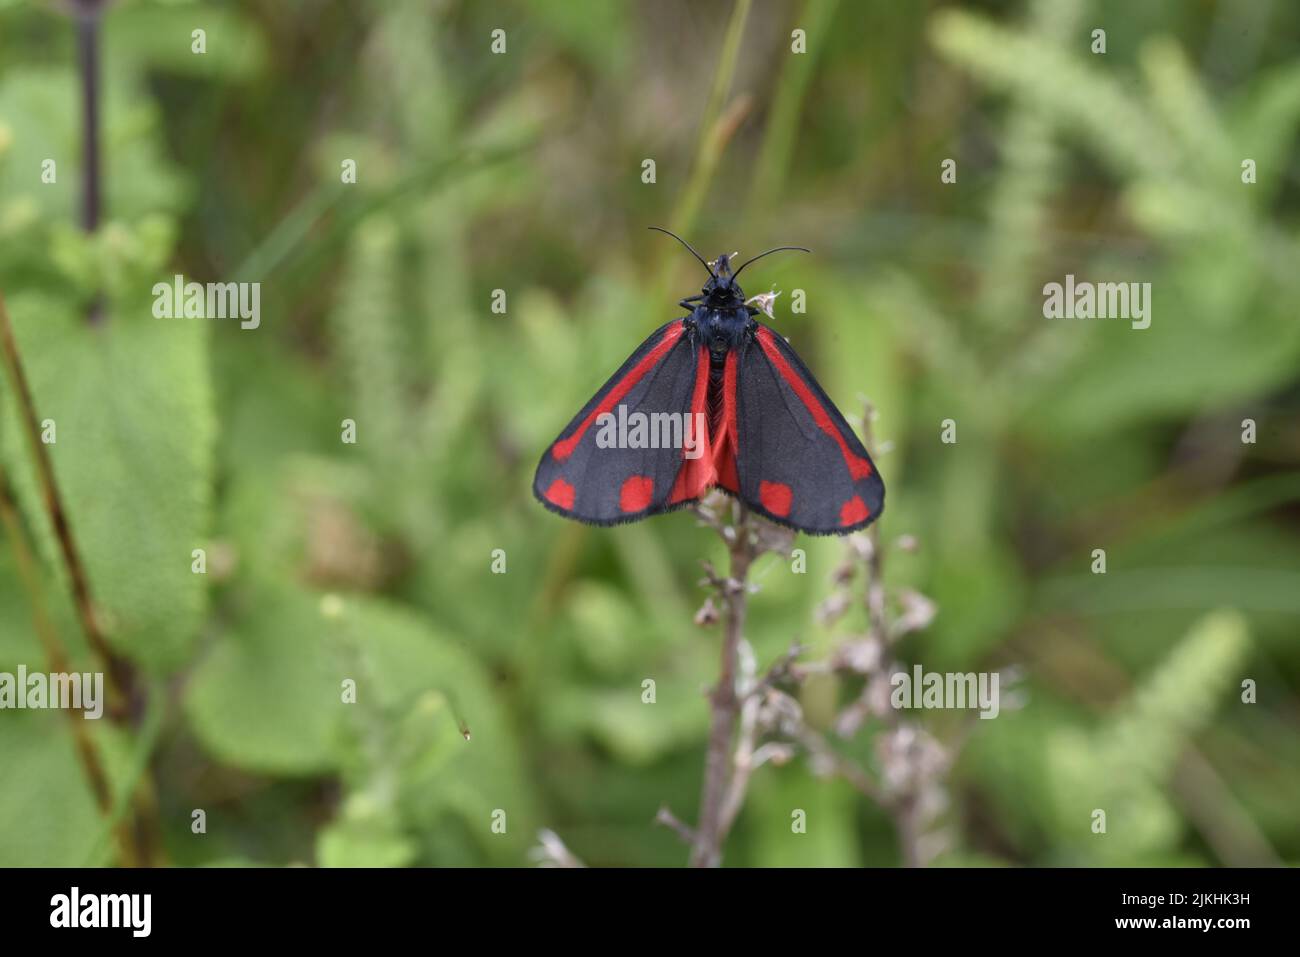 Close-Up Image of a Cinnabar Moth (Tyria jacobaeae) against a Blurred Green Foliage Background, with Wings Open and Markings Clear, in the UK in June Stock Photo